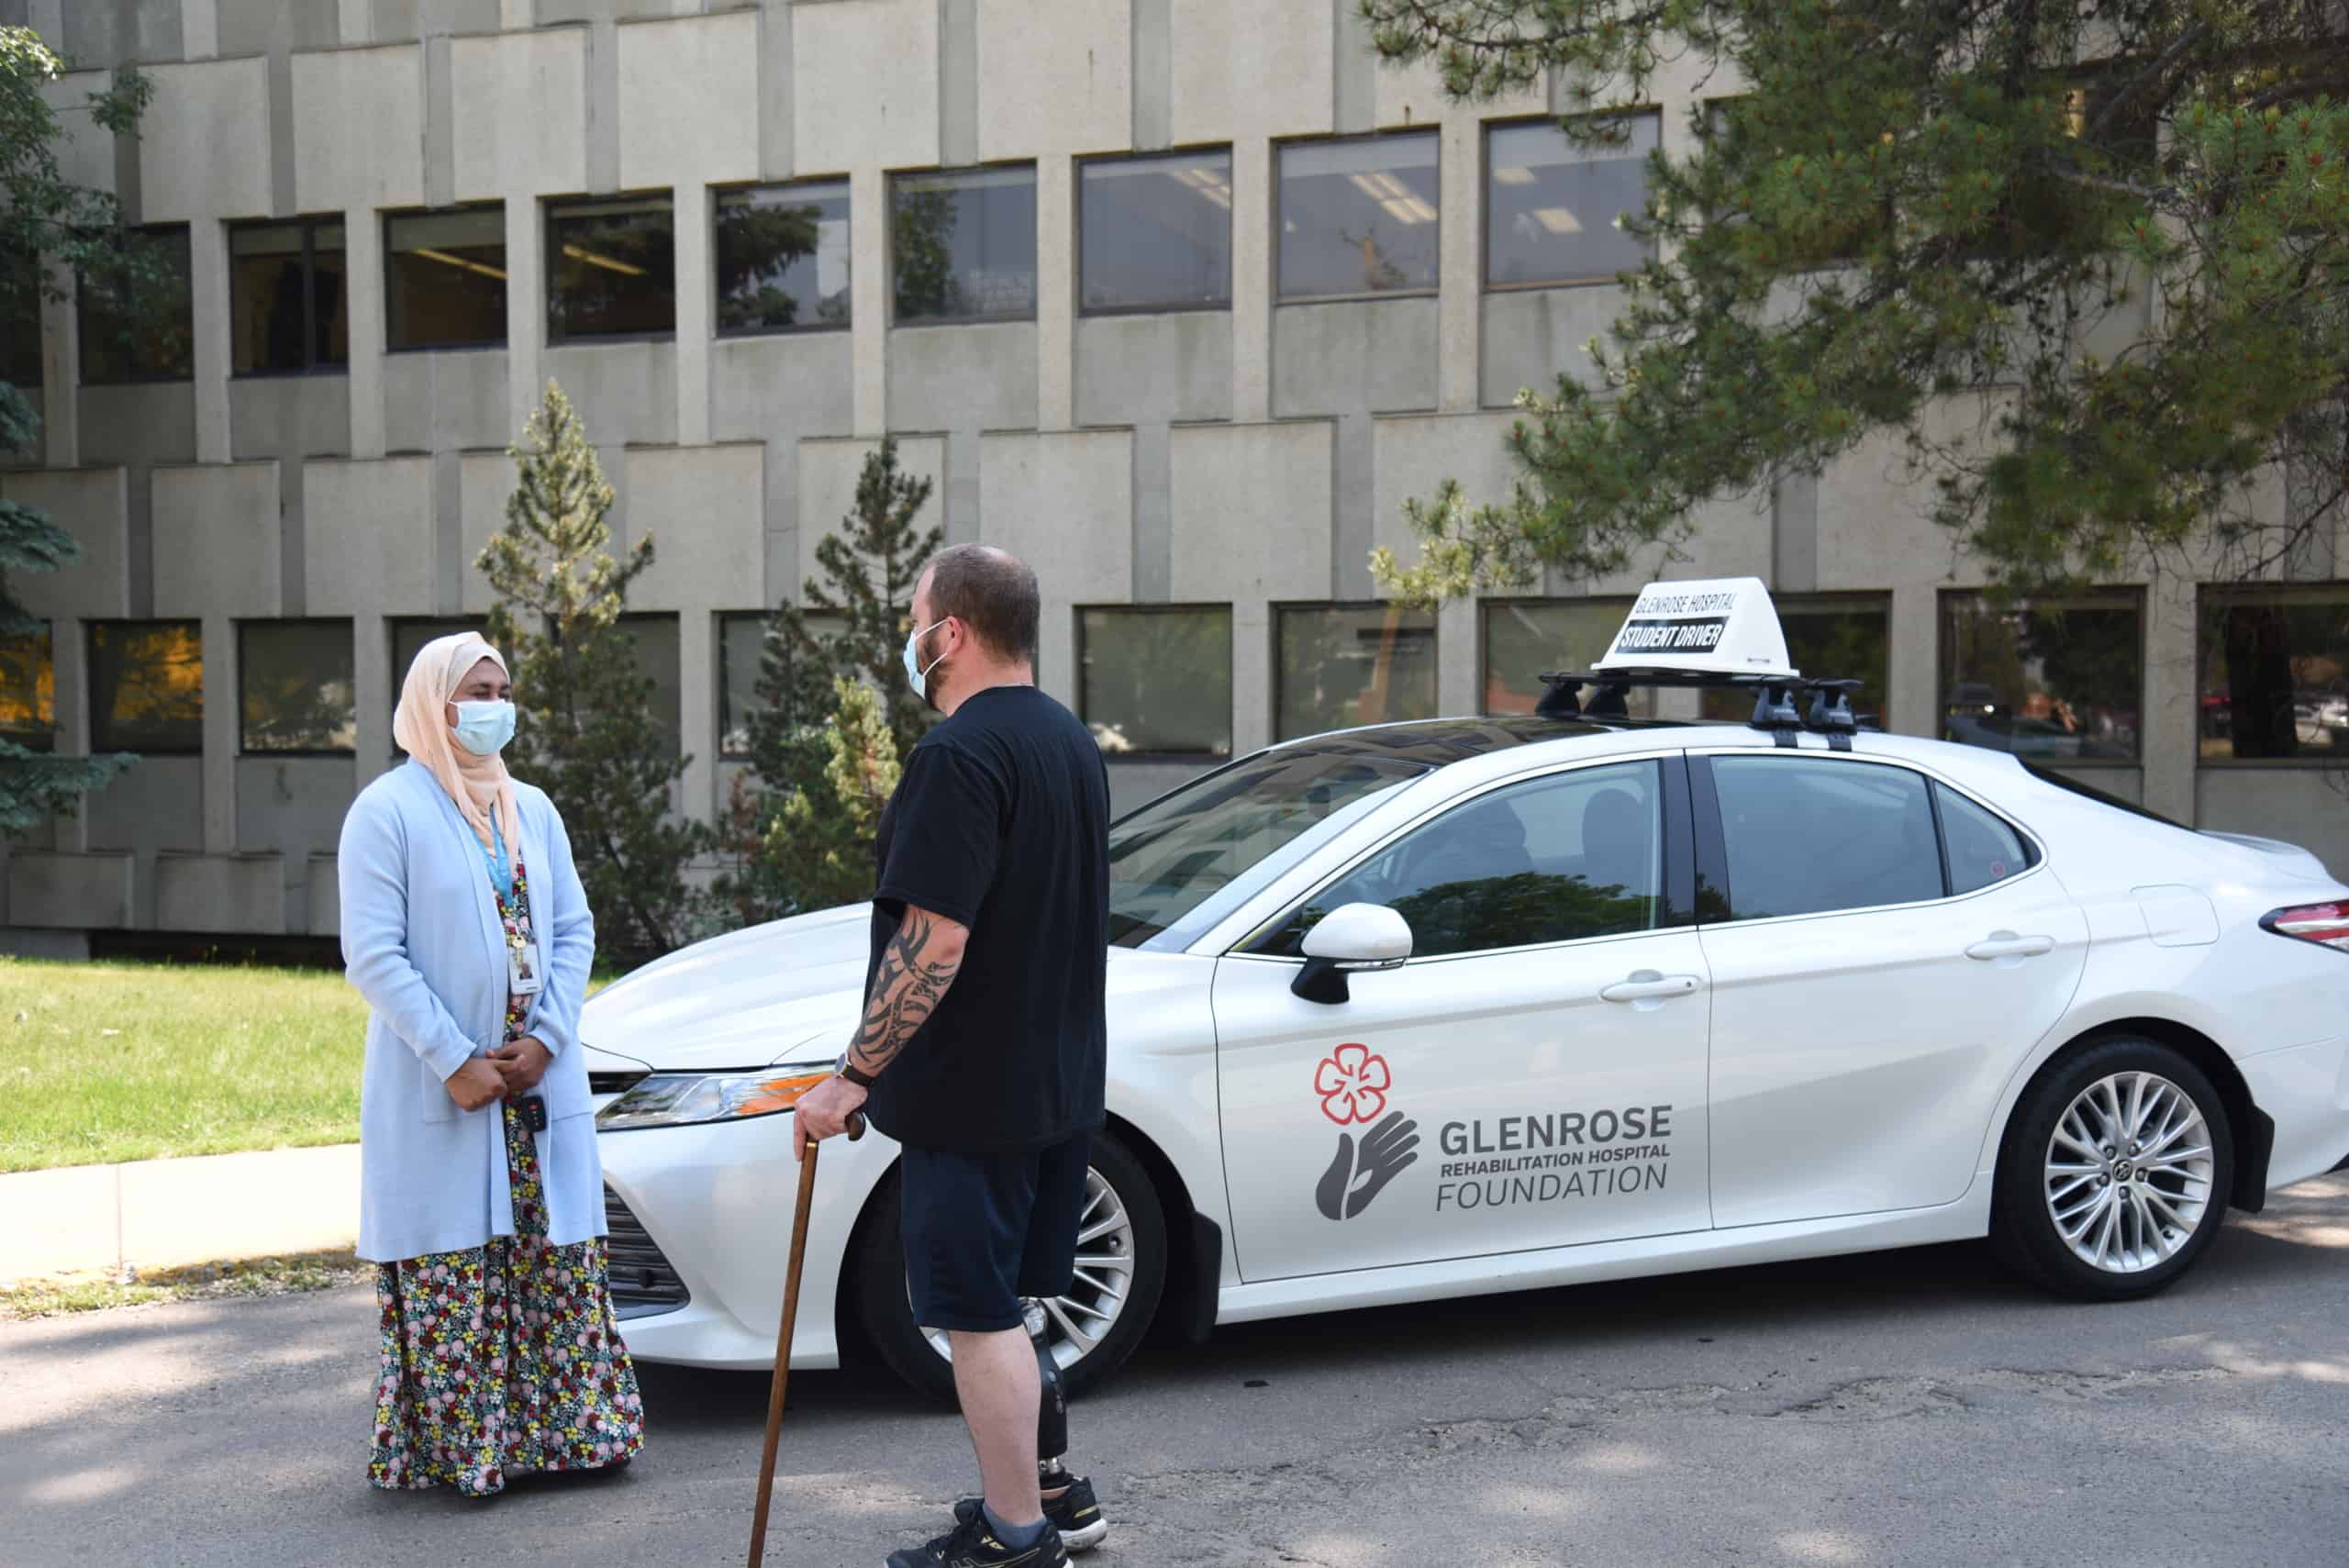 Photo of a man and woman standing outside a white car. They are both wearing masks and are speaking to each other.